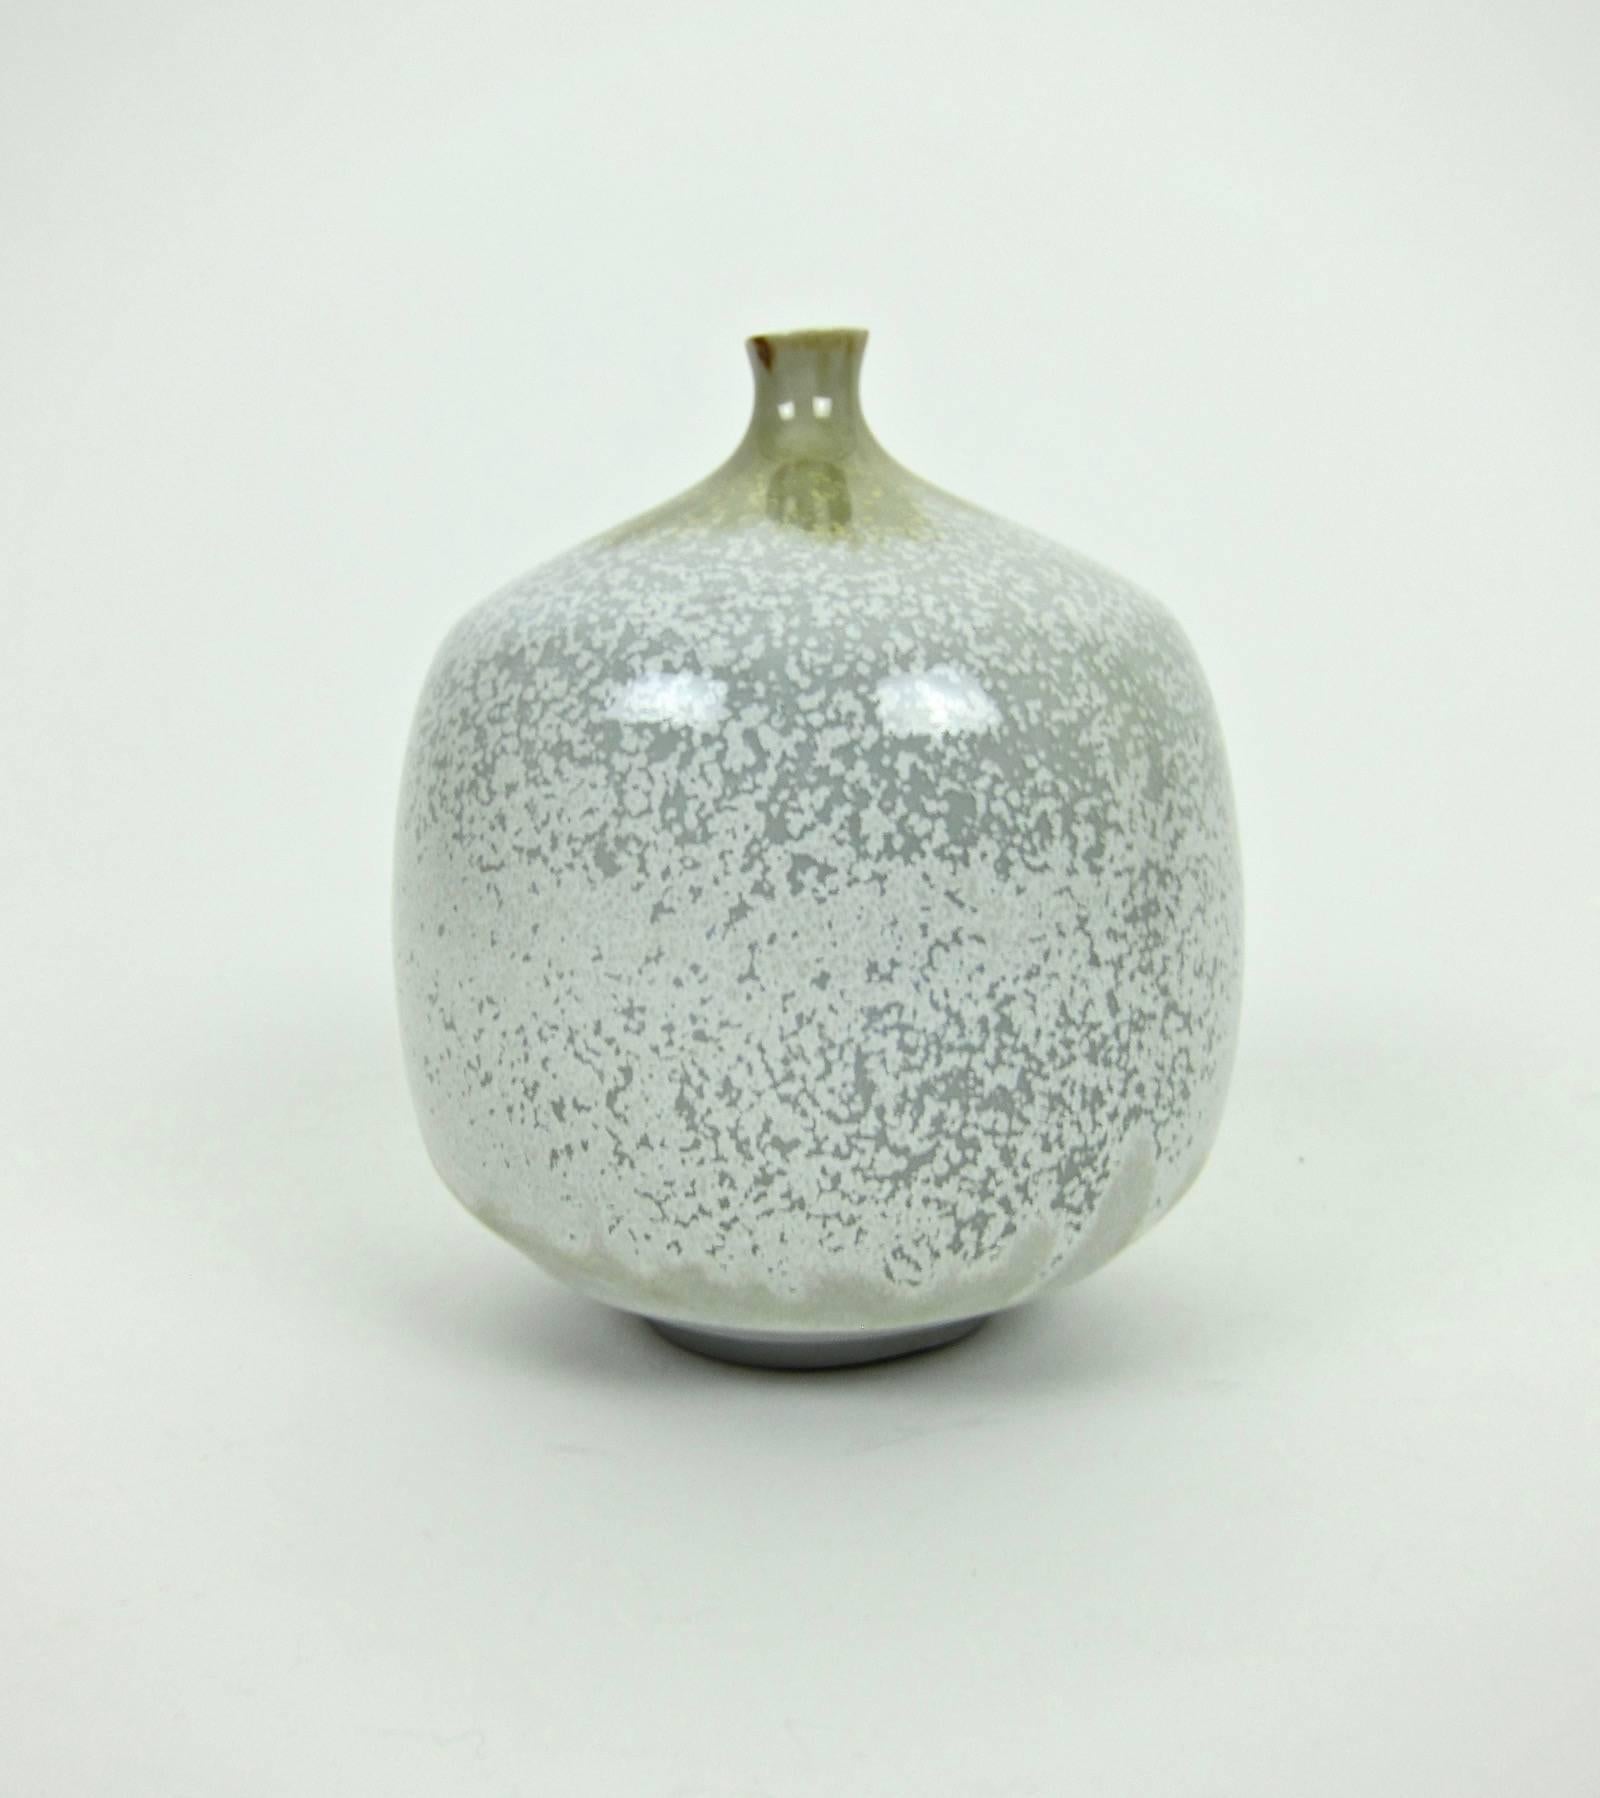 A Mid-Century porcelain weed pot vase decorated with sophisticated glazing techniques in neutral tones, signed Ostone underfoot. 

The top of the vintage vase is decorated with a glossy flambe glaze in earthy shades of green and brown while the body